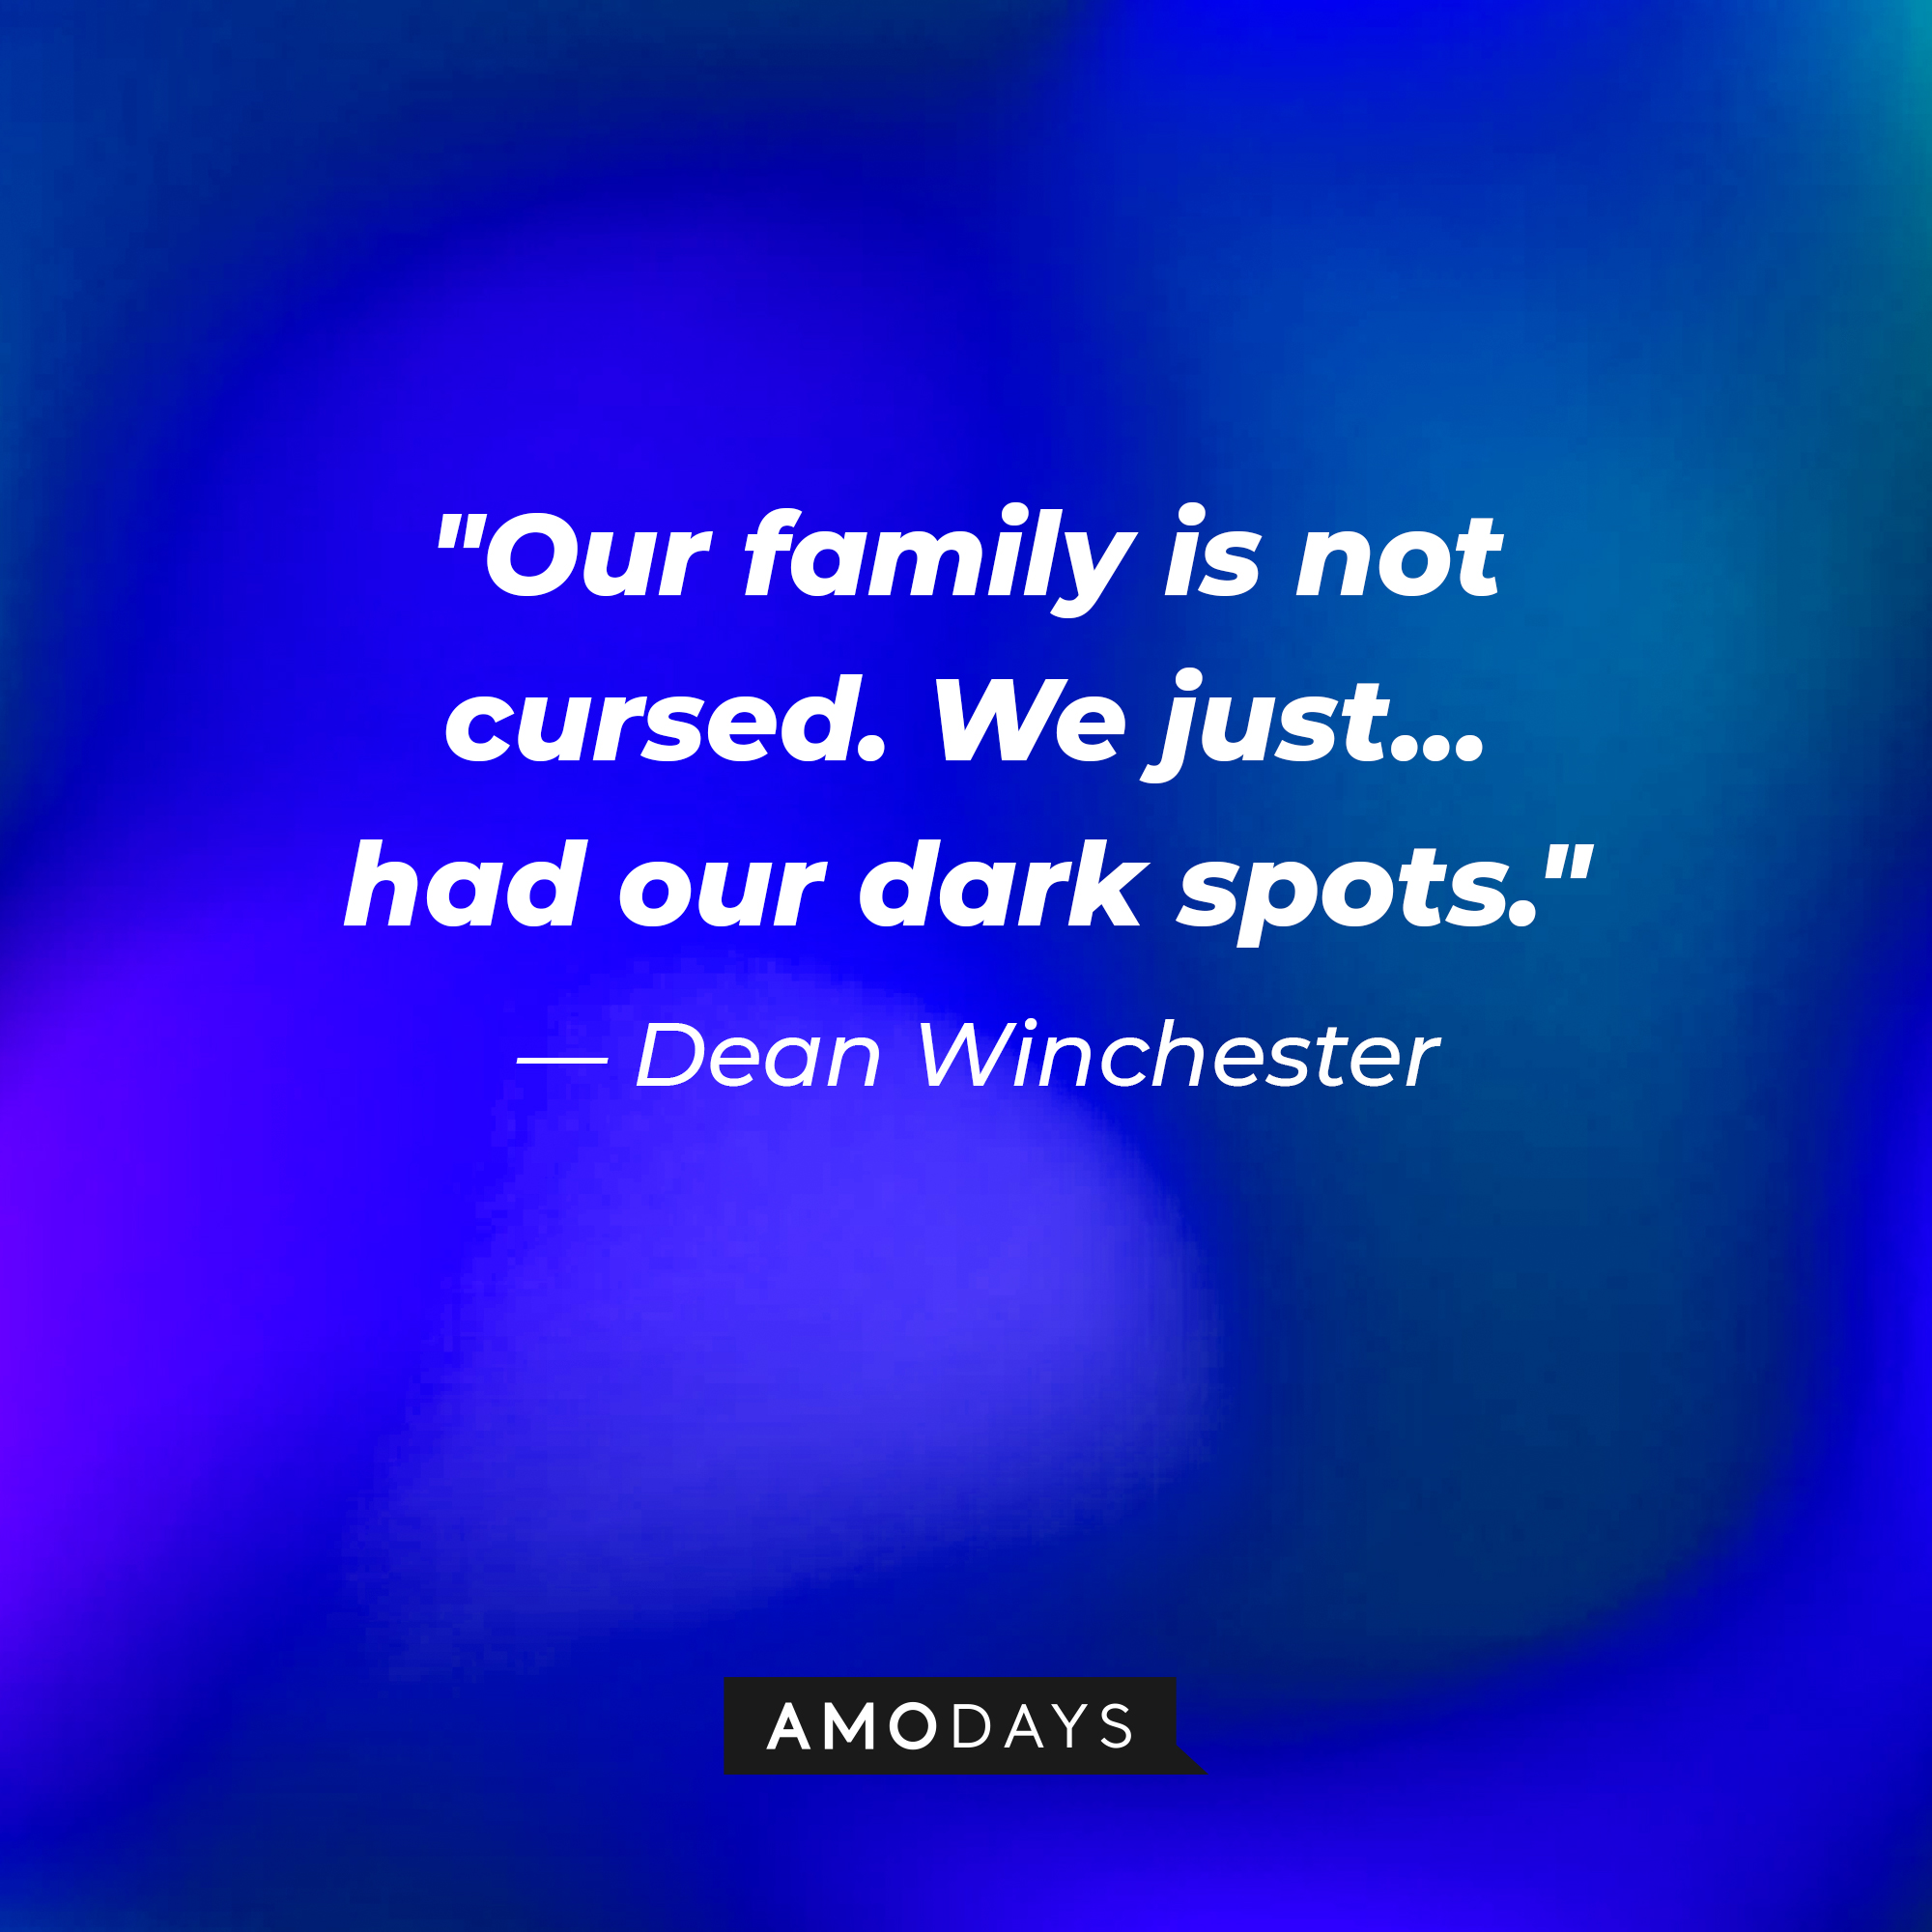 Dean Winchester's quote, "Our family is not cursed. We just... had our dark spots." | Source: Amodays